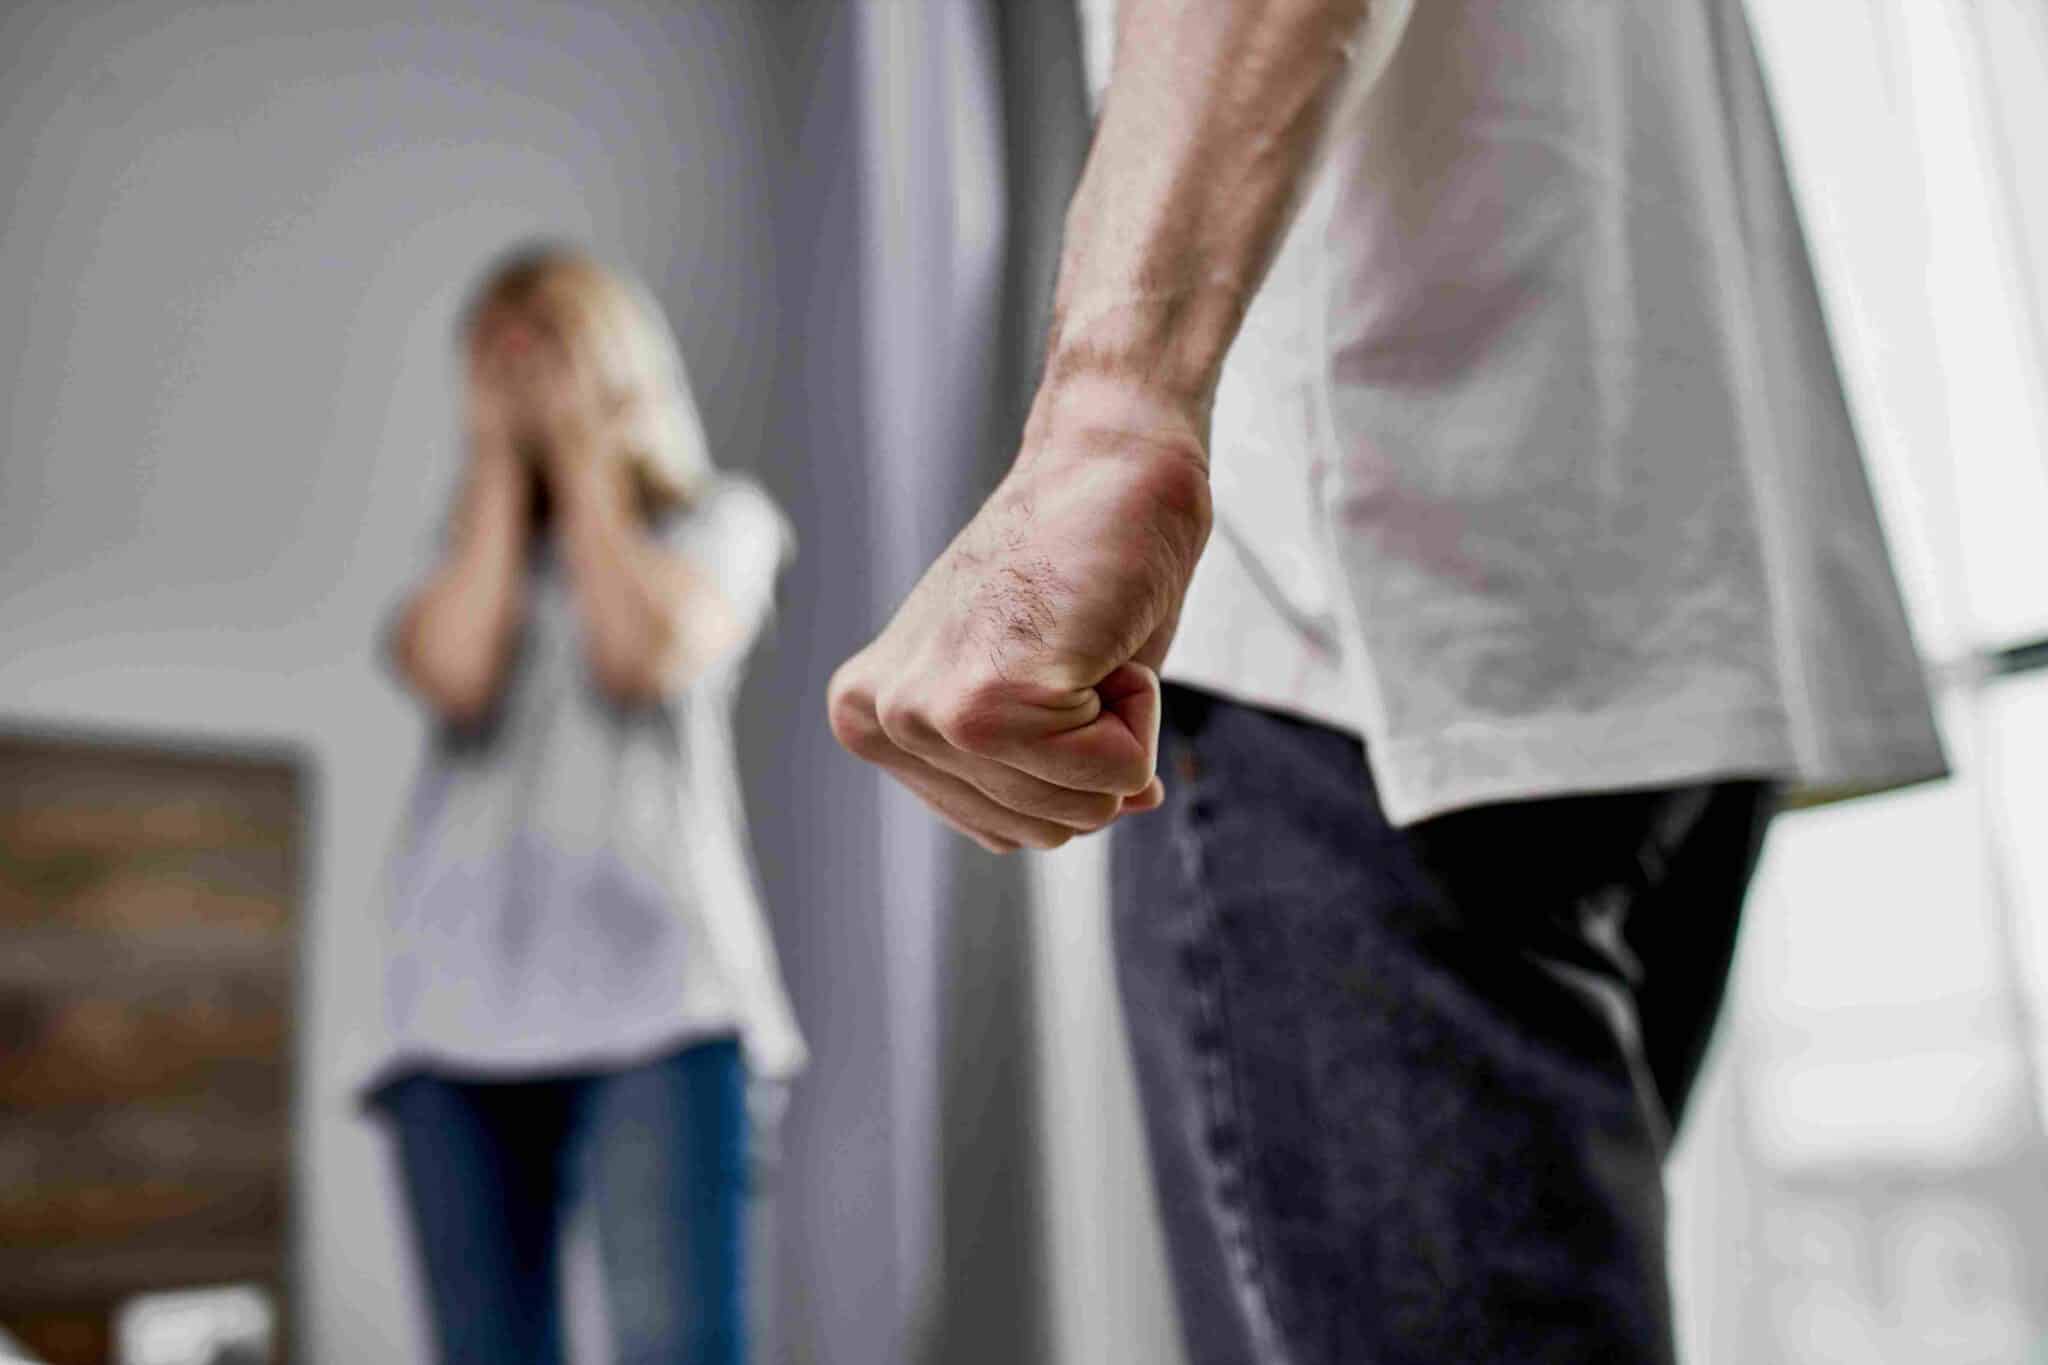 What Is a No-Drop Policy in a Domestic Violence Case?